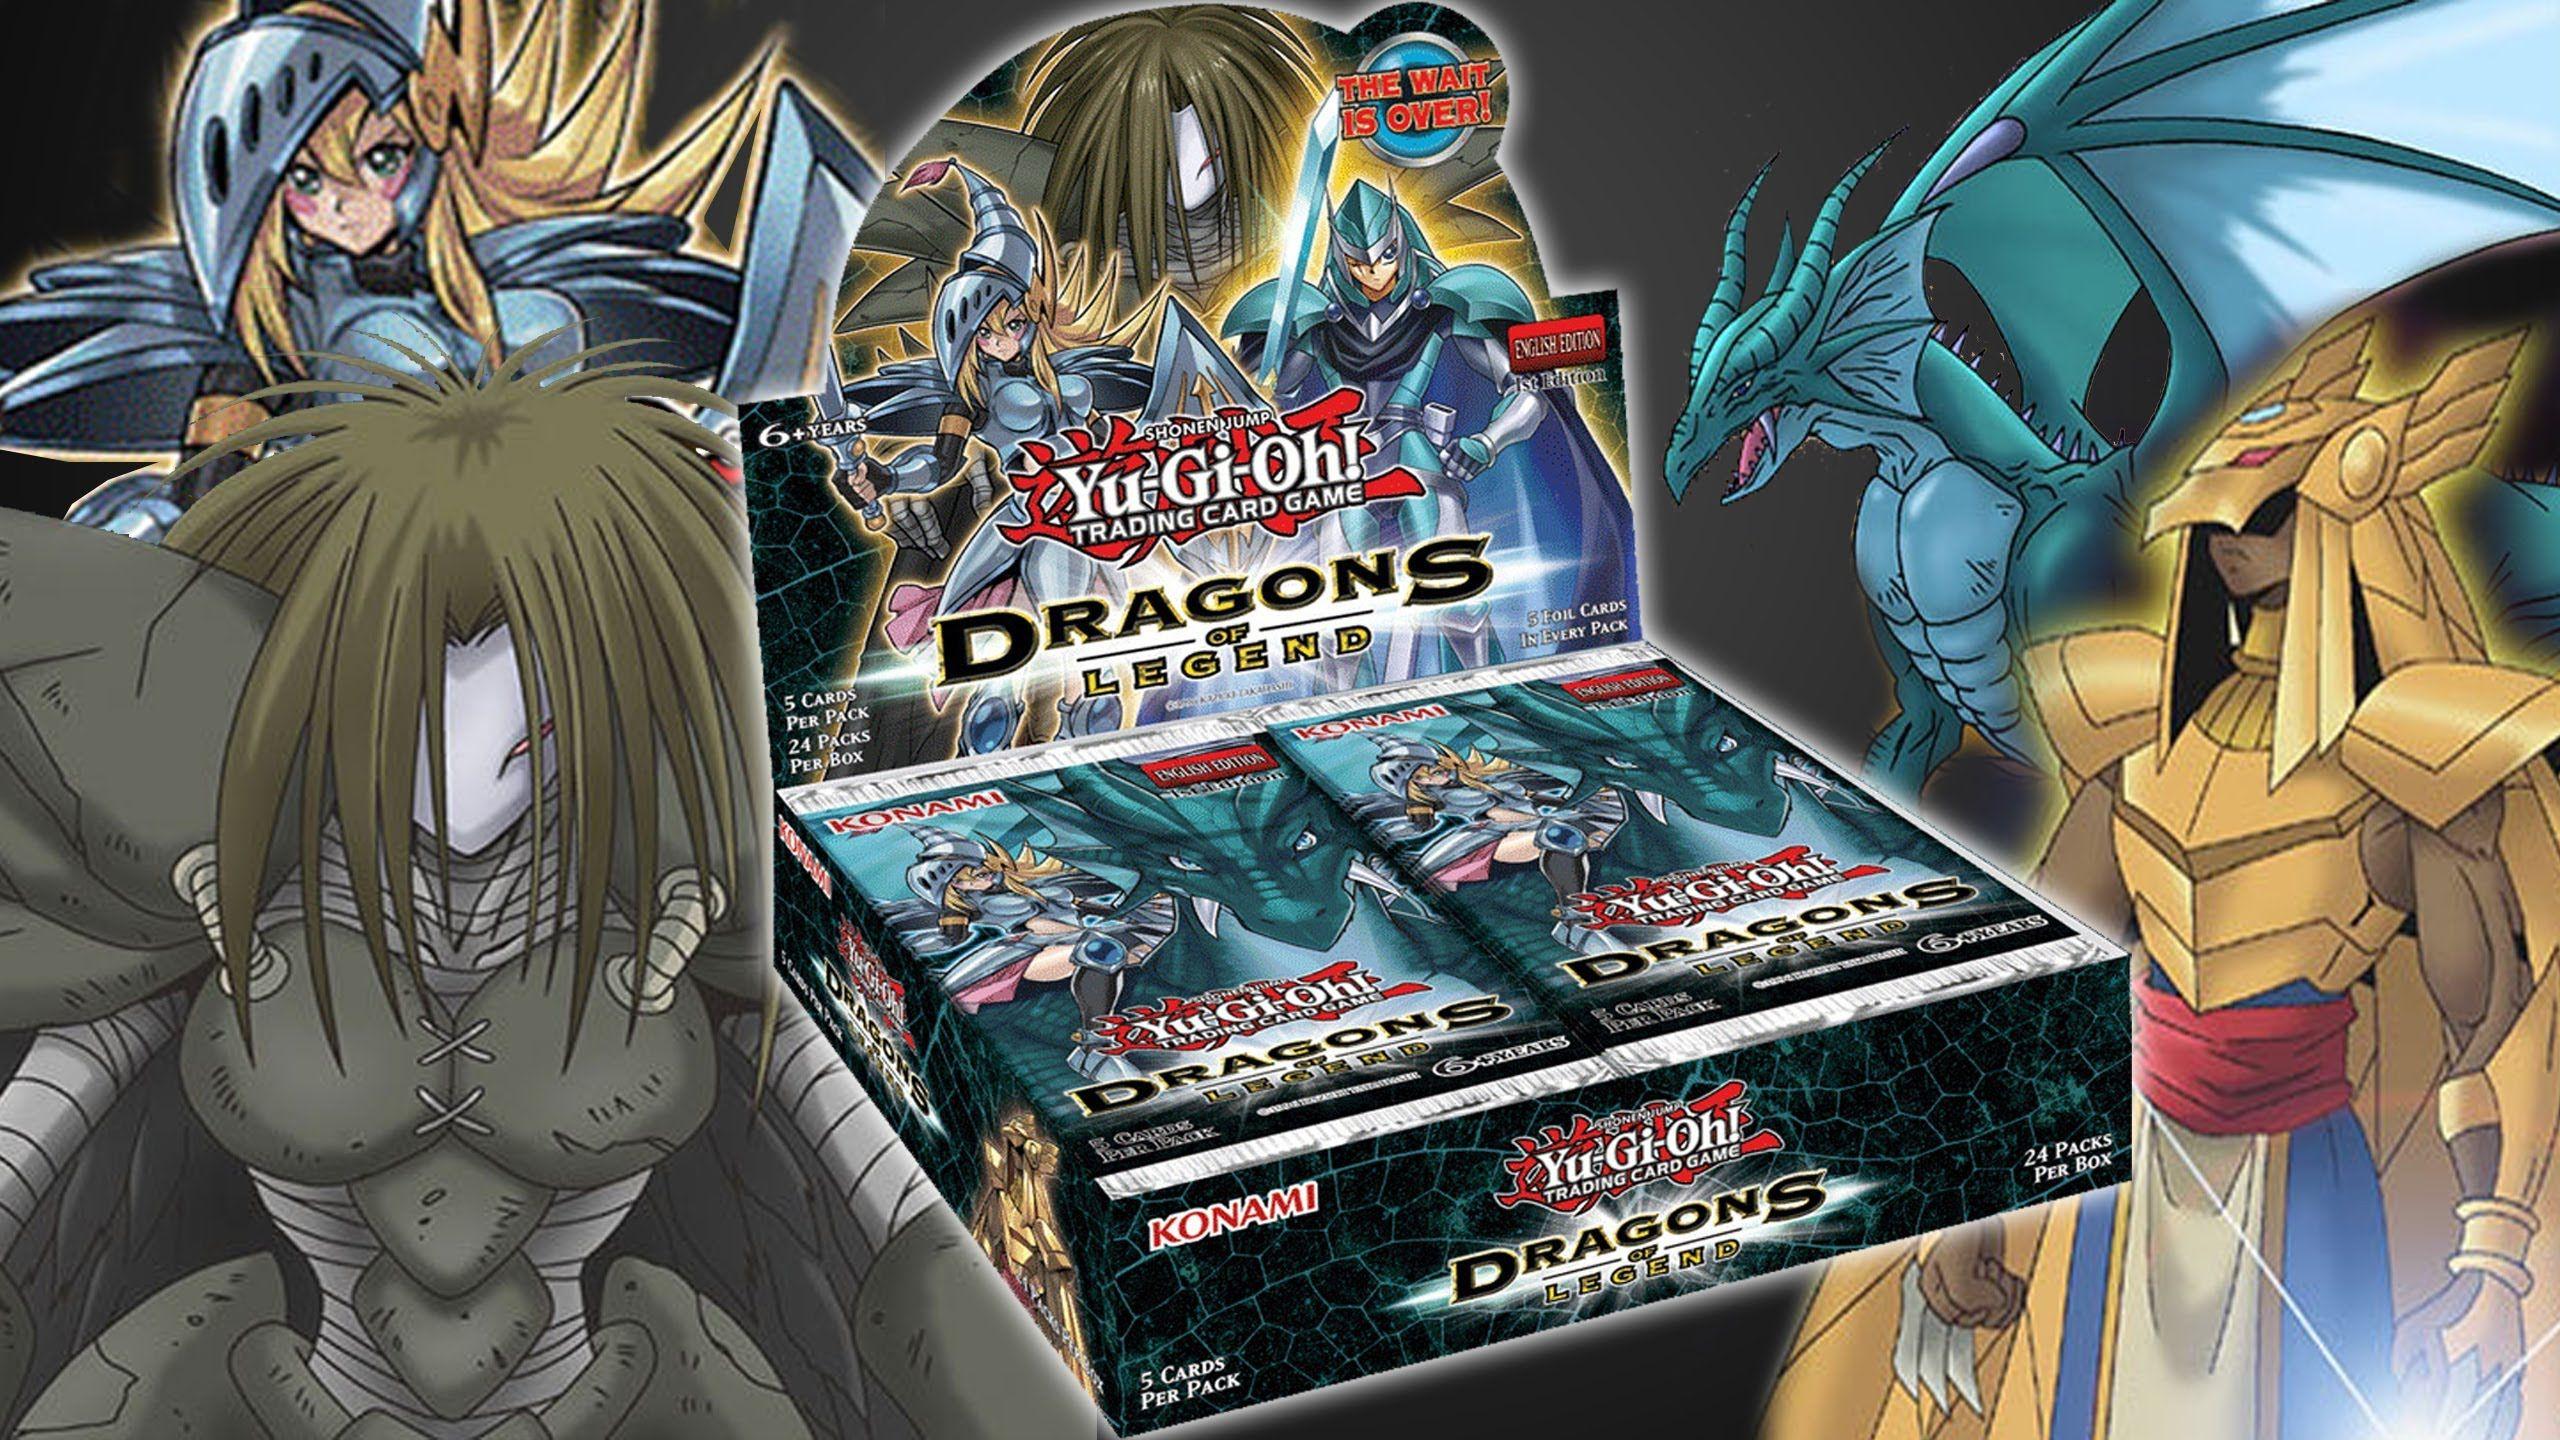 Yugioh News of Legend!, Timaeus will be released! & Much